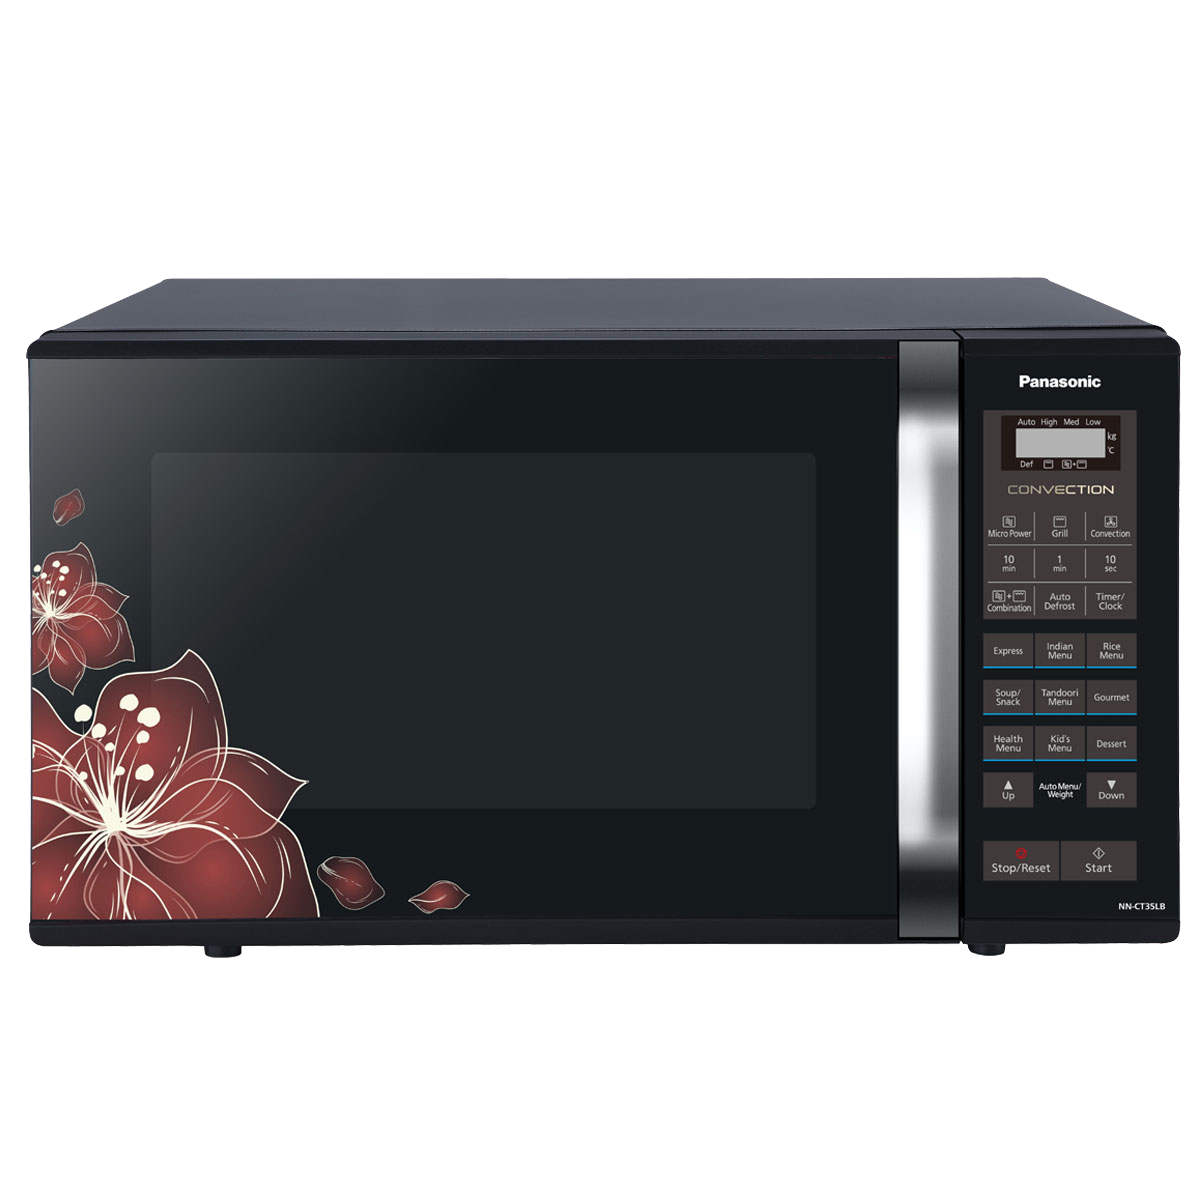 Panasonic 23 Litres Convection Microwave Oven Nn-ct35lbfdg Black Floral